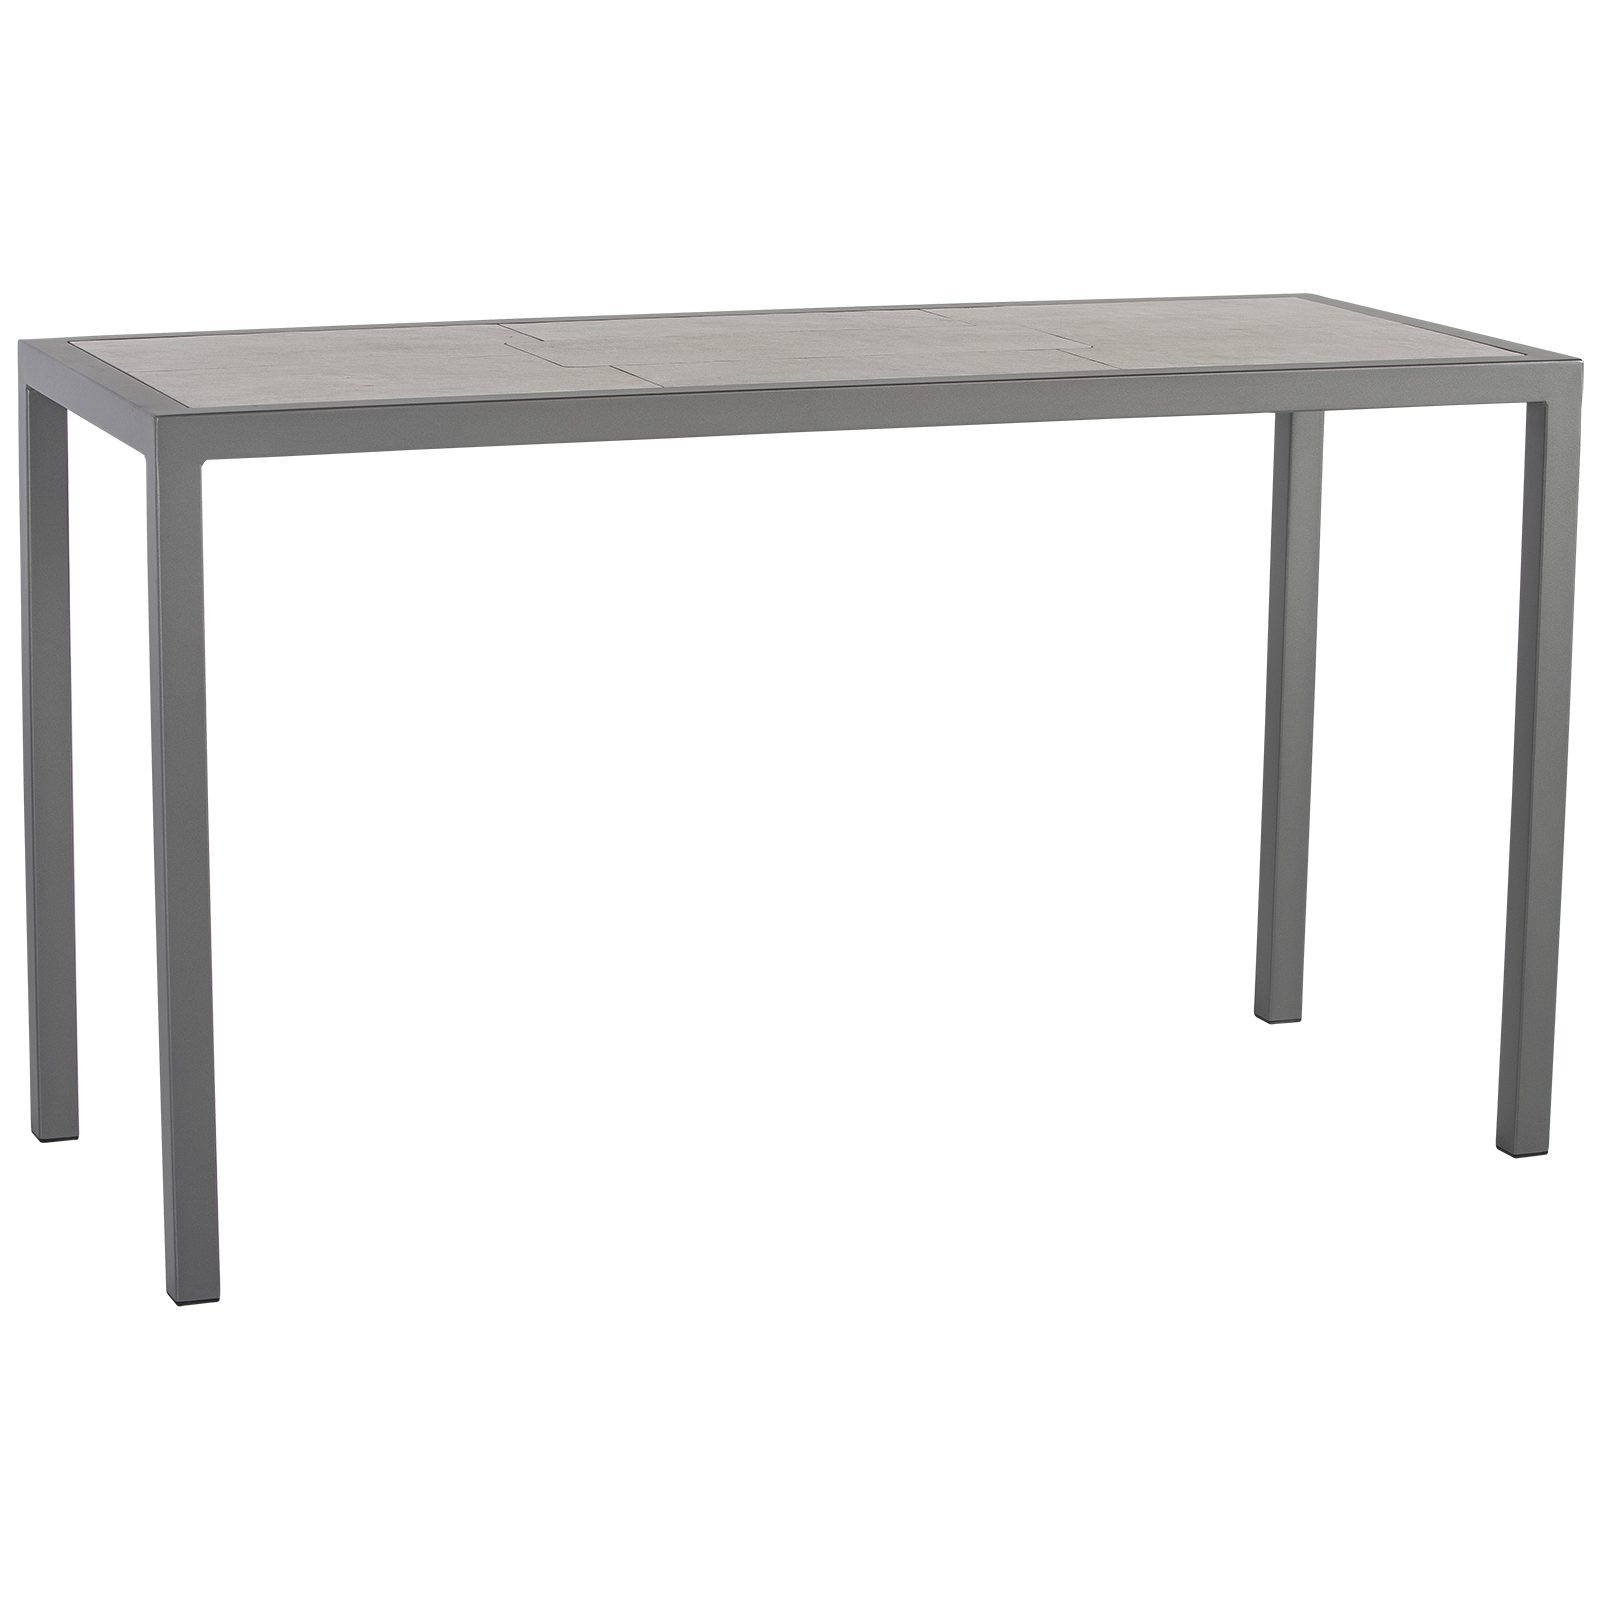 21" x 57" Dining Table - Fully Welded Tables - Quadra Iron Tables 106